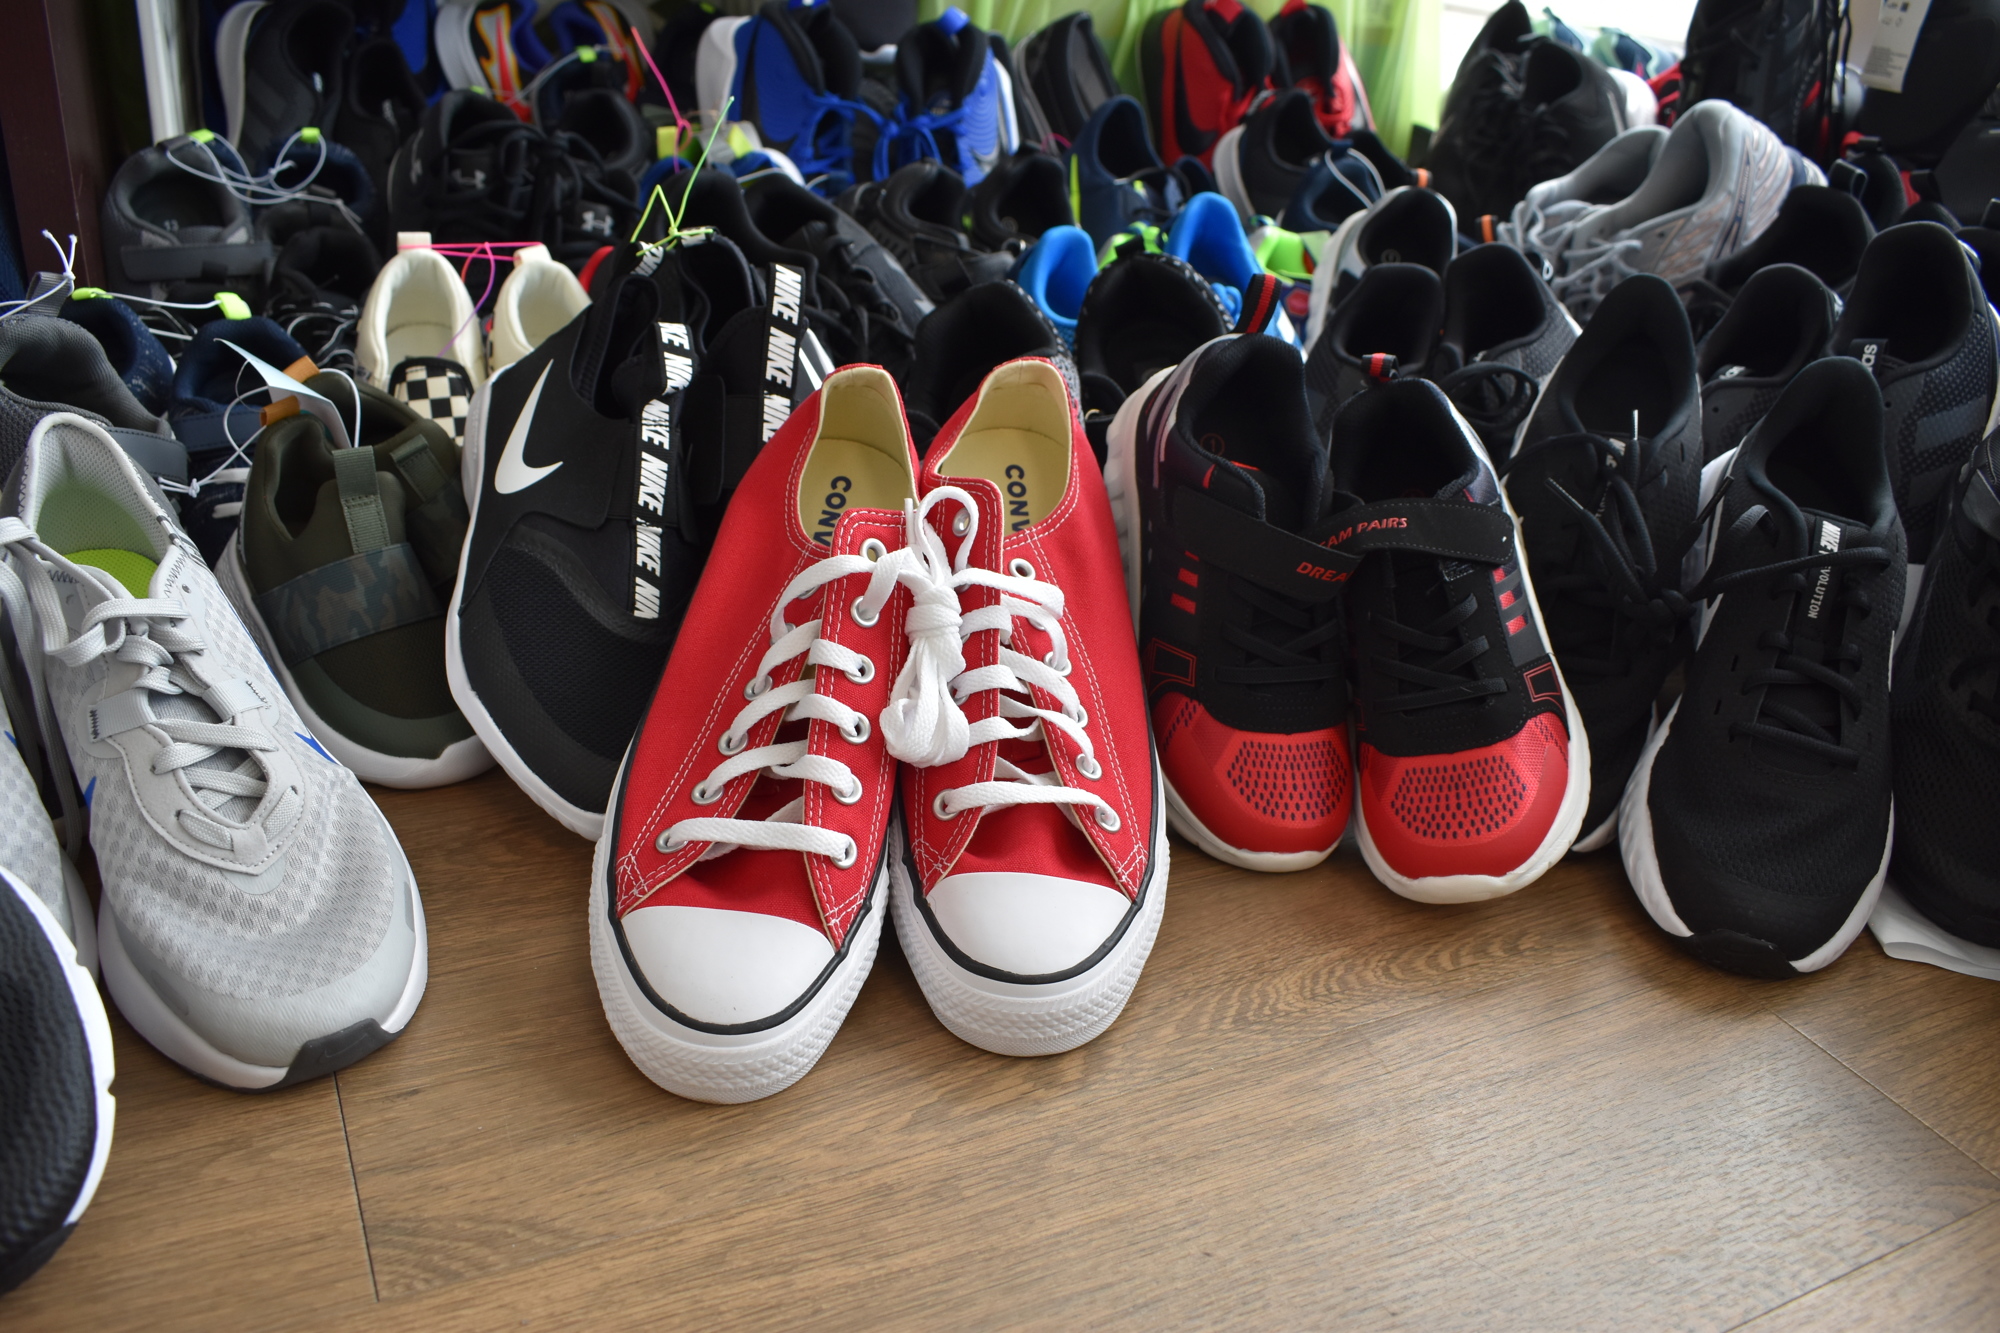 The Lake Club Women's Giving Circle brought in 264 pairs of shoes. (Photo by Ian Swaby)